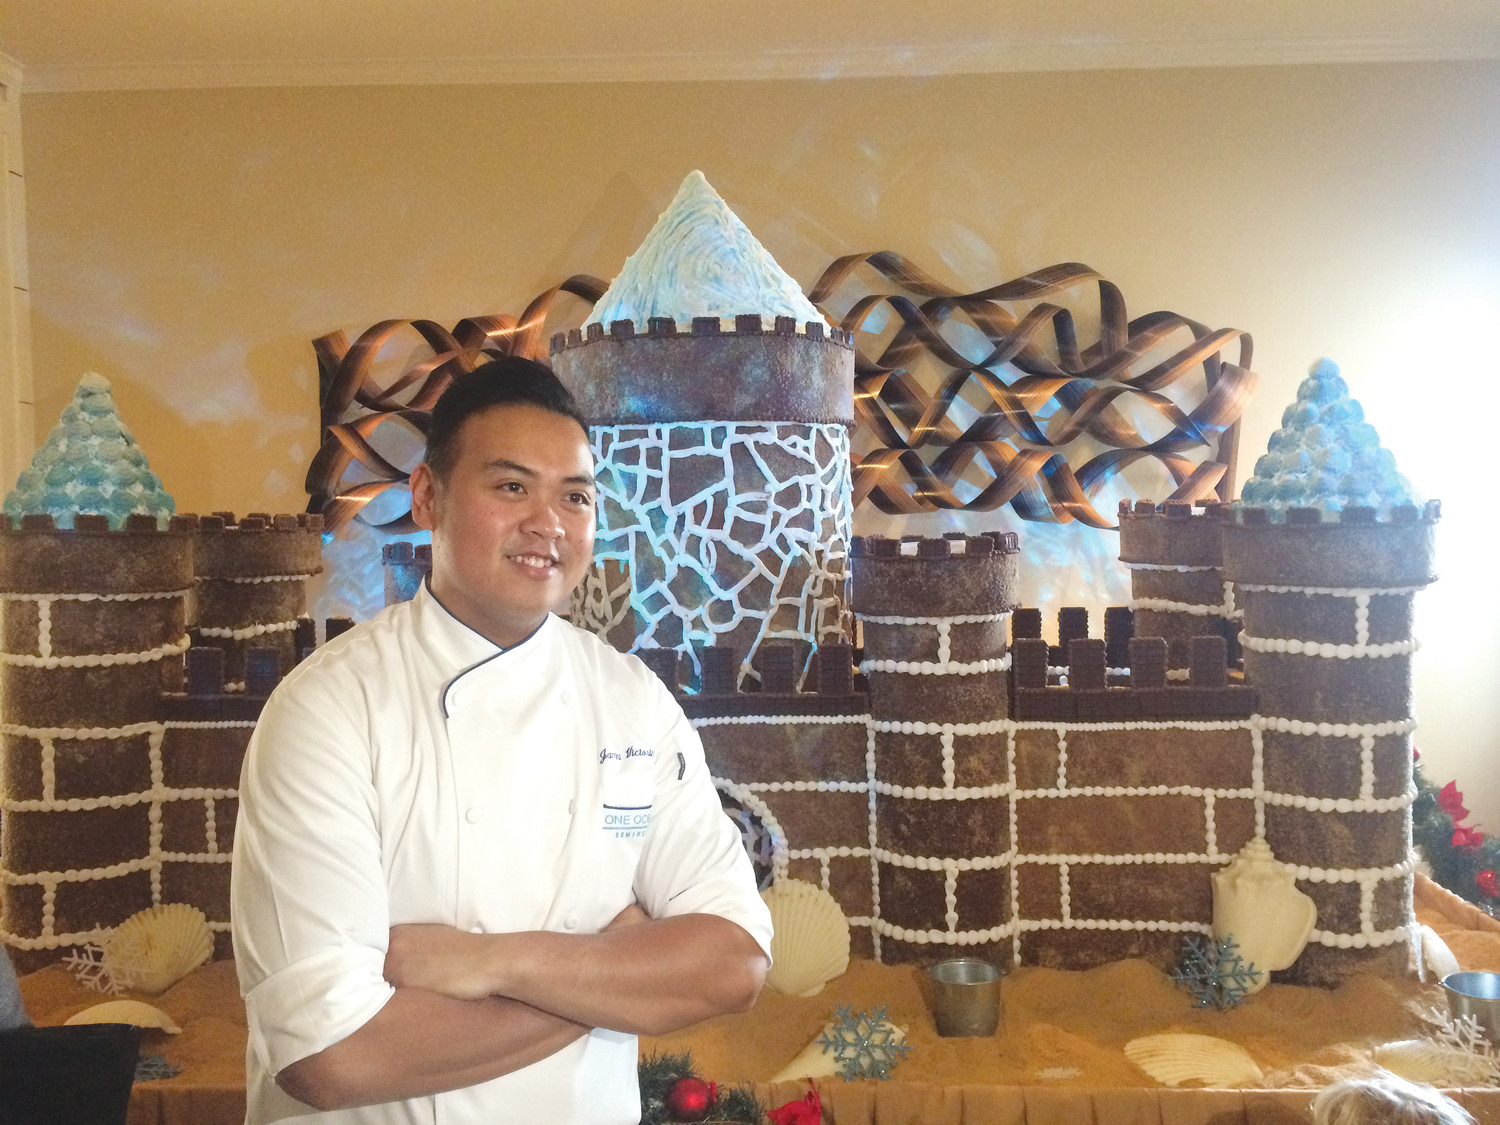 A One Ocean Resort & Spa employee poses for photos in front of the gingerbread castle.